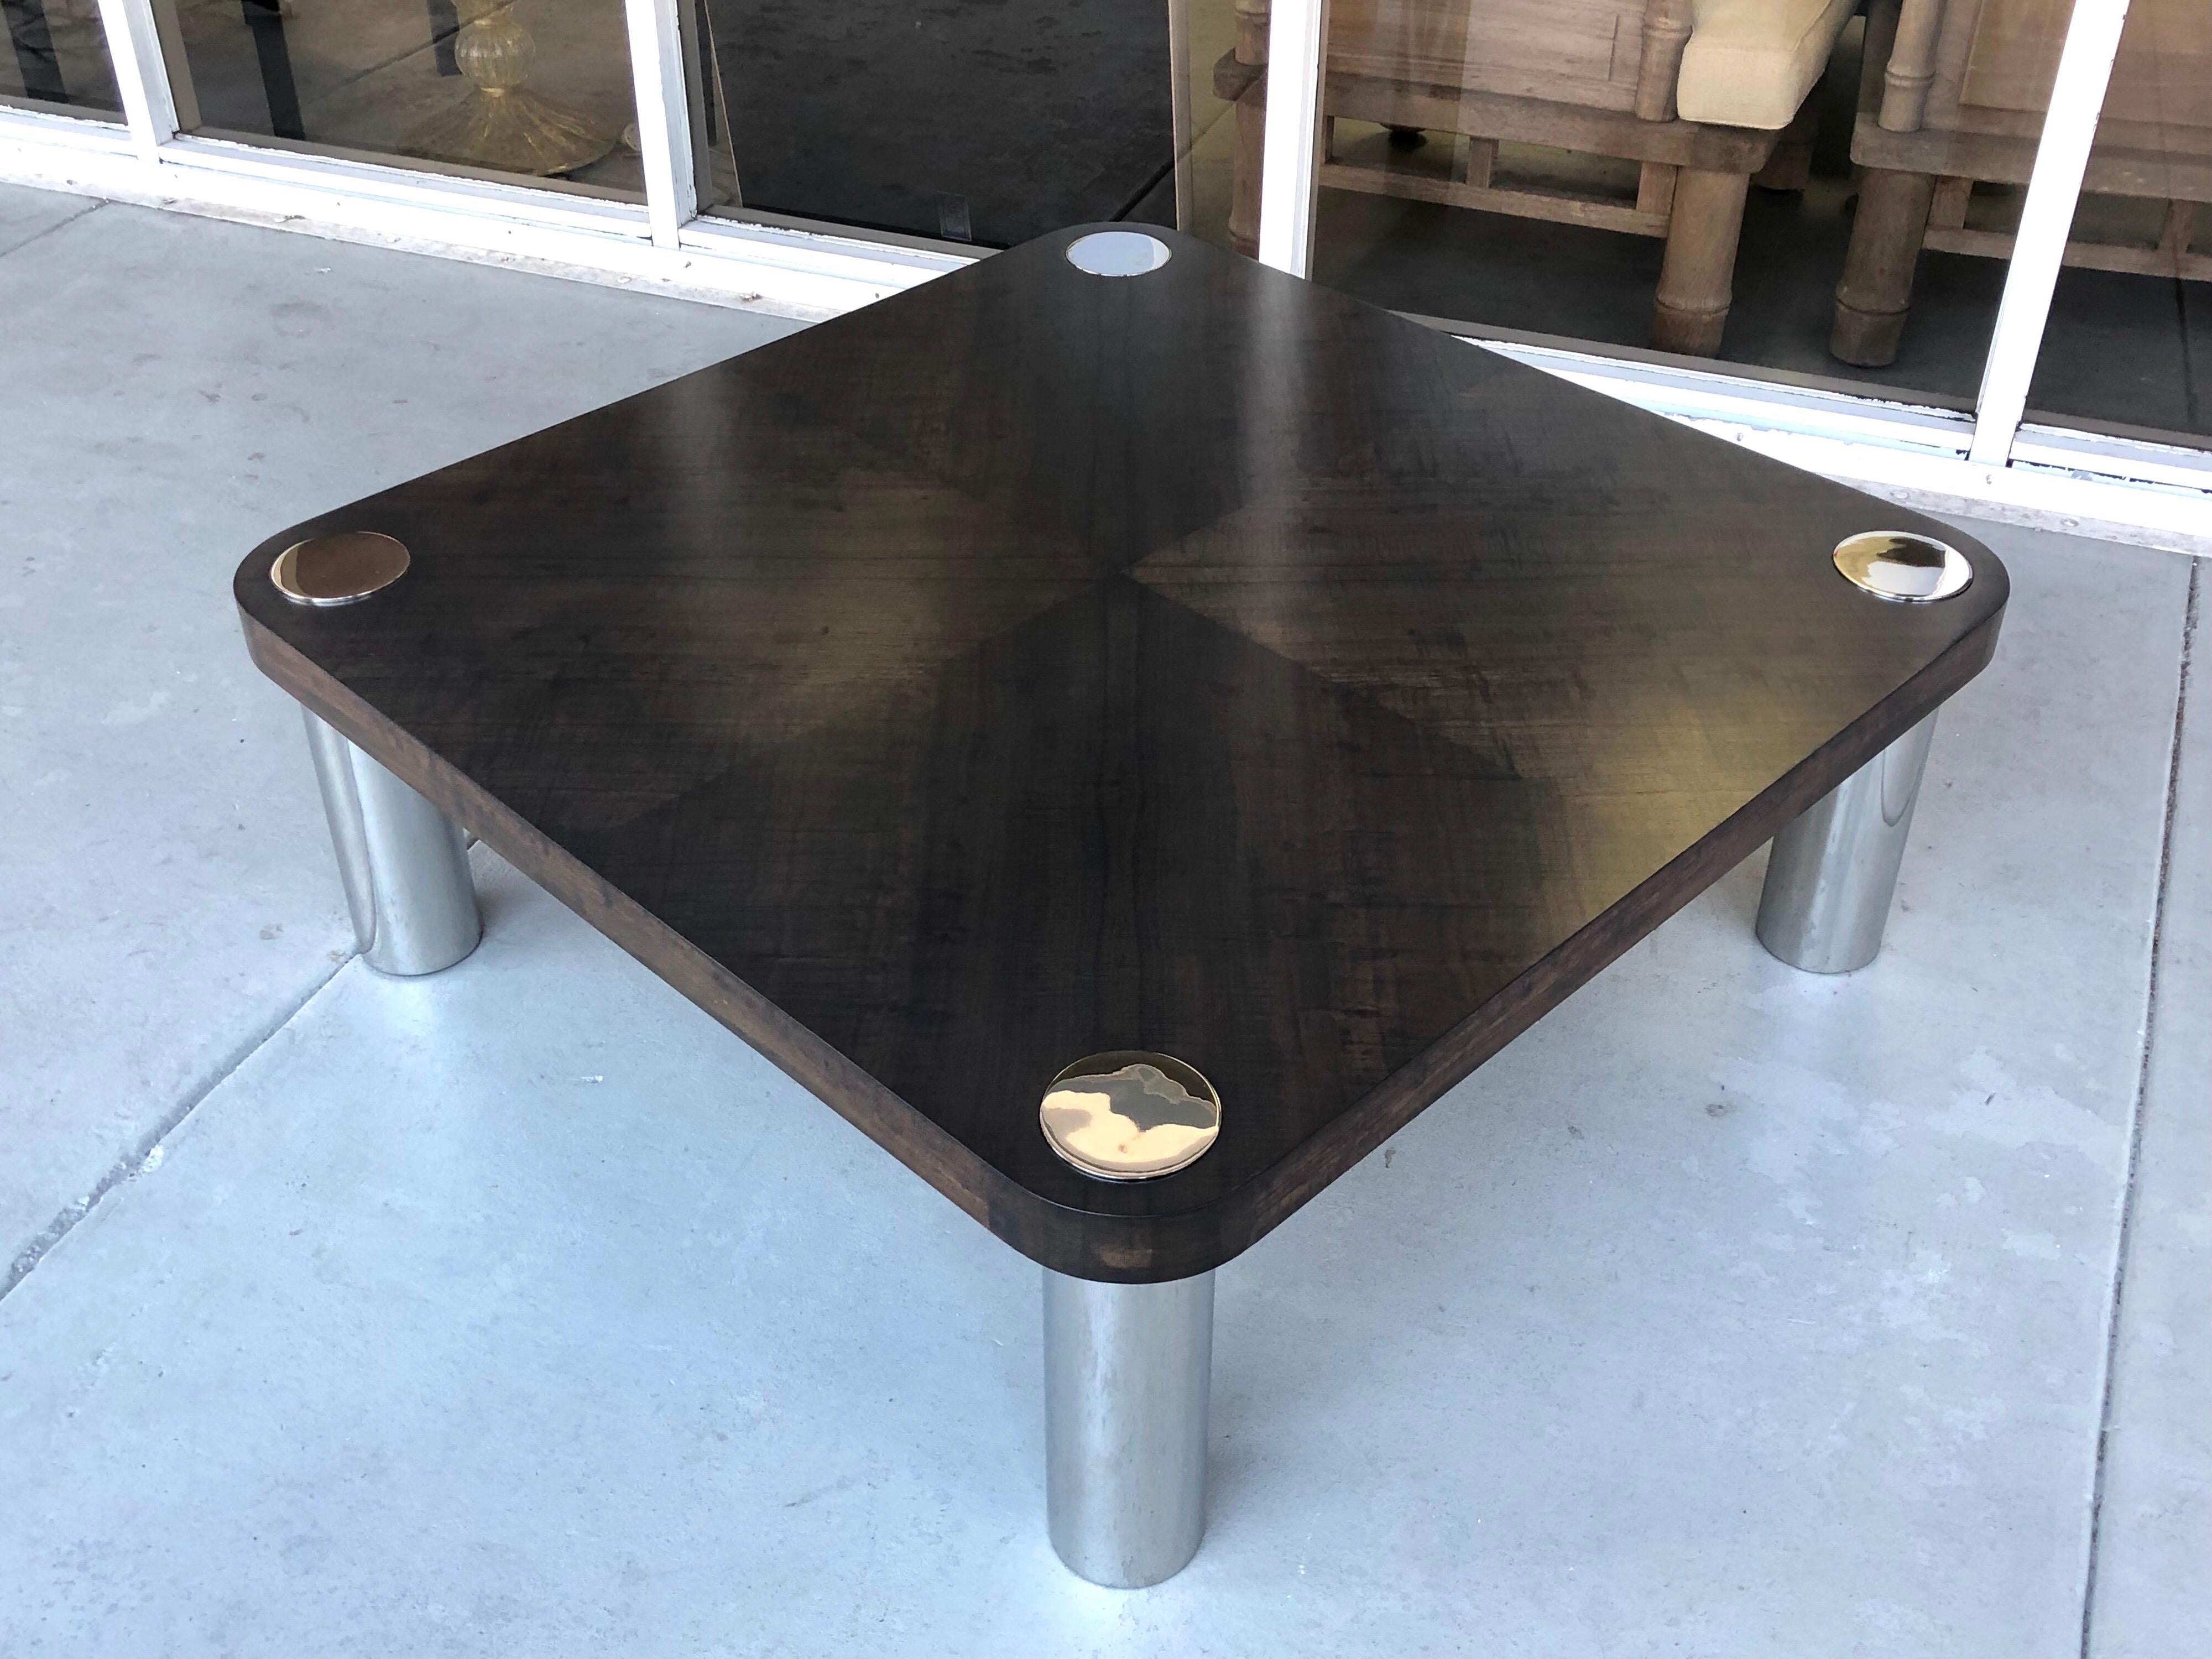 Polished Vladimir Kagan Wood and Stainless Steel Coffee Table, 1970s For Sale